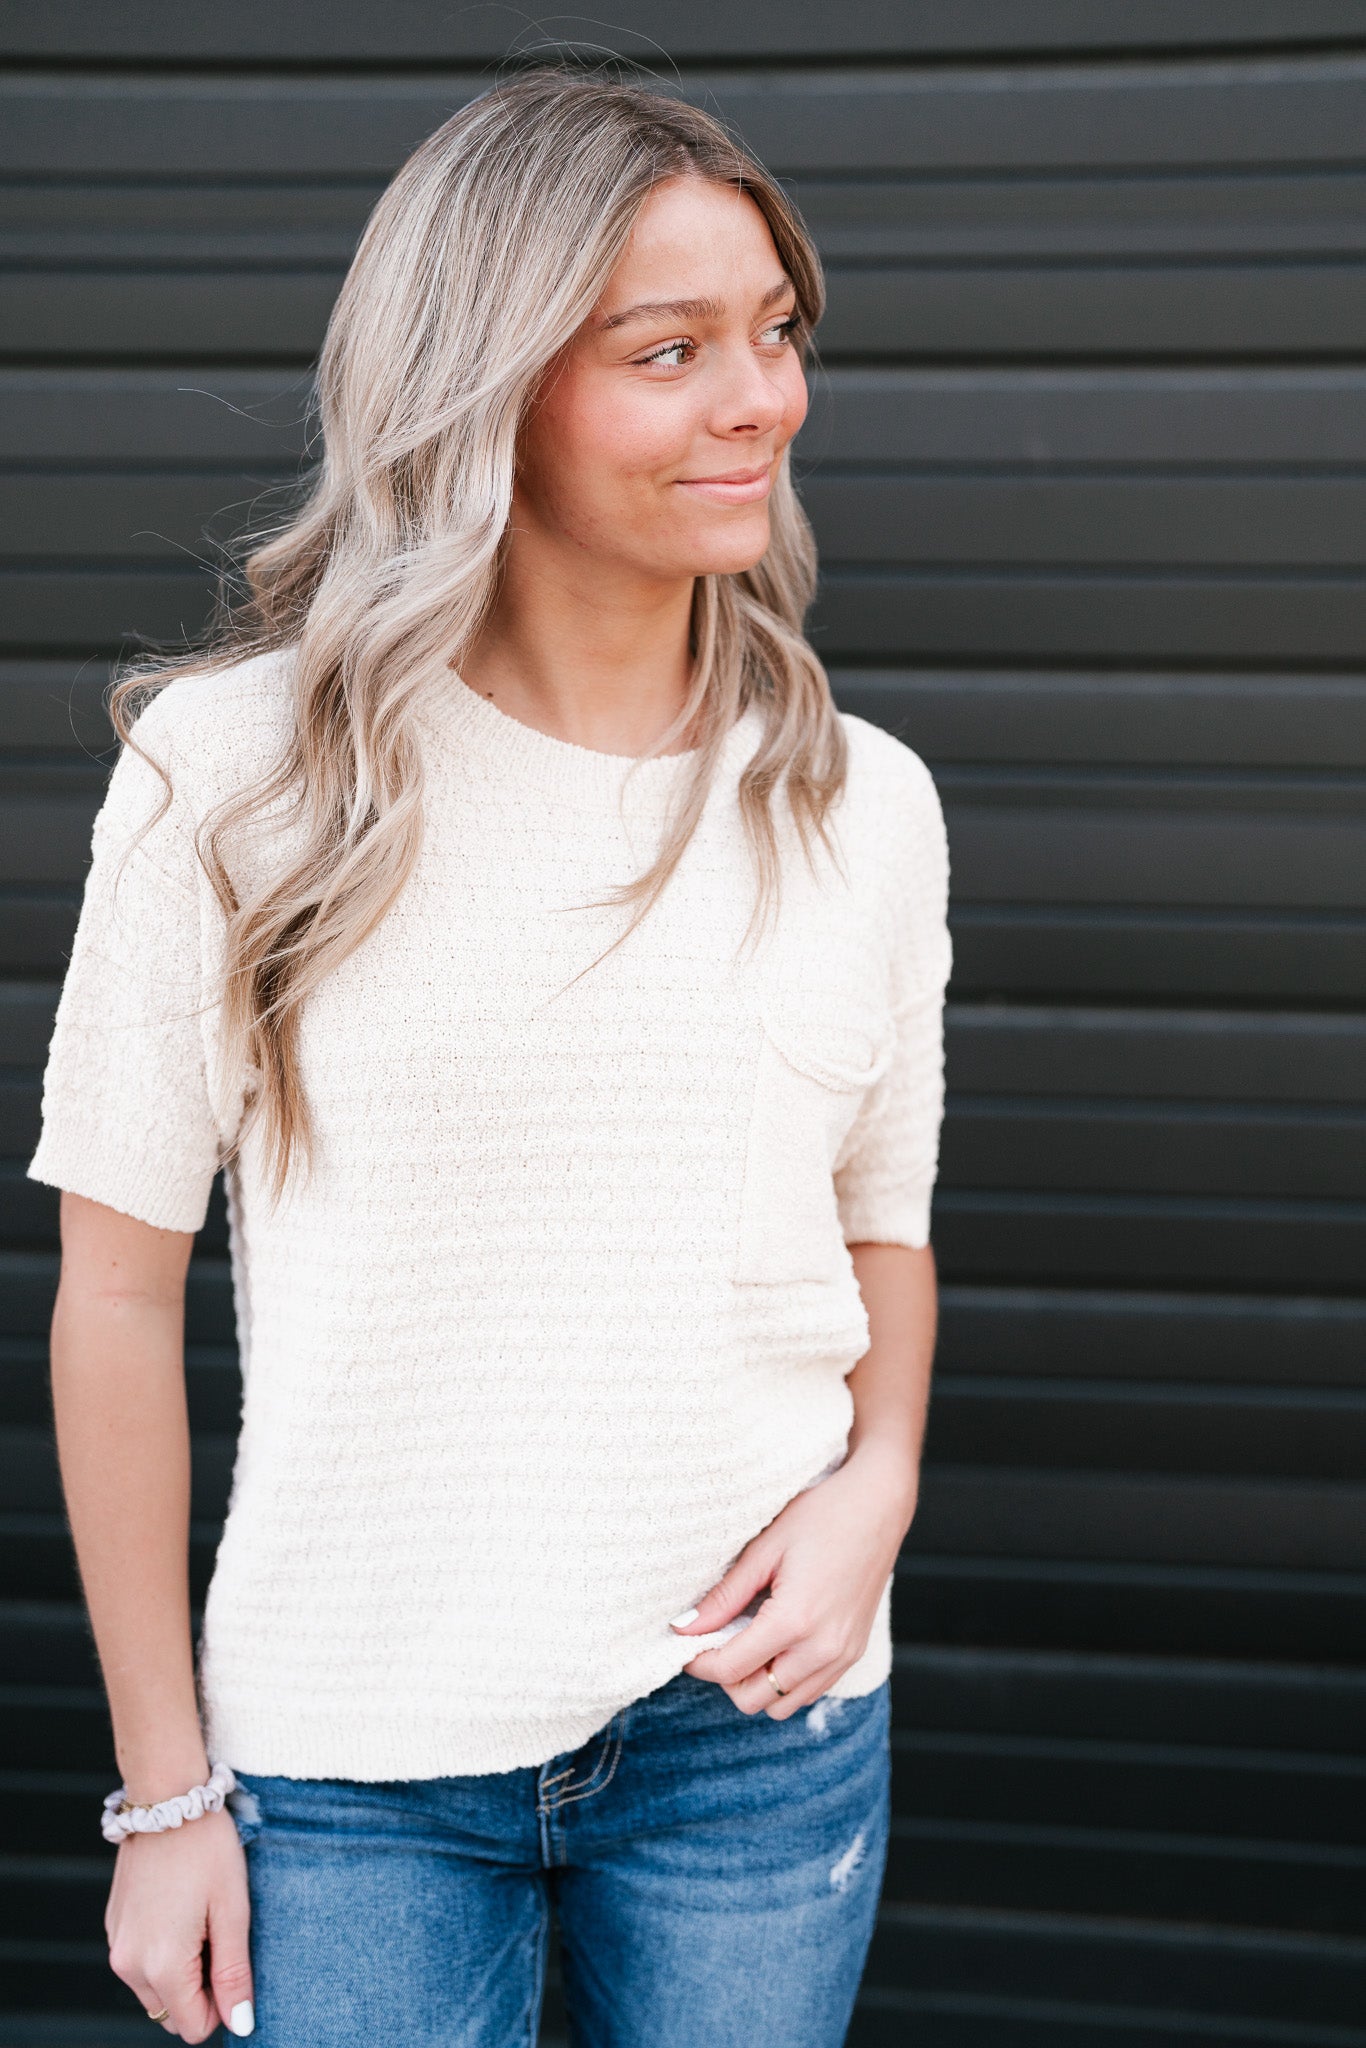 Wanderlust Cable Knit Sweater